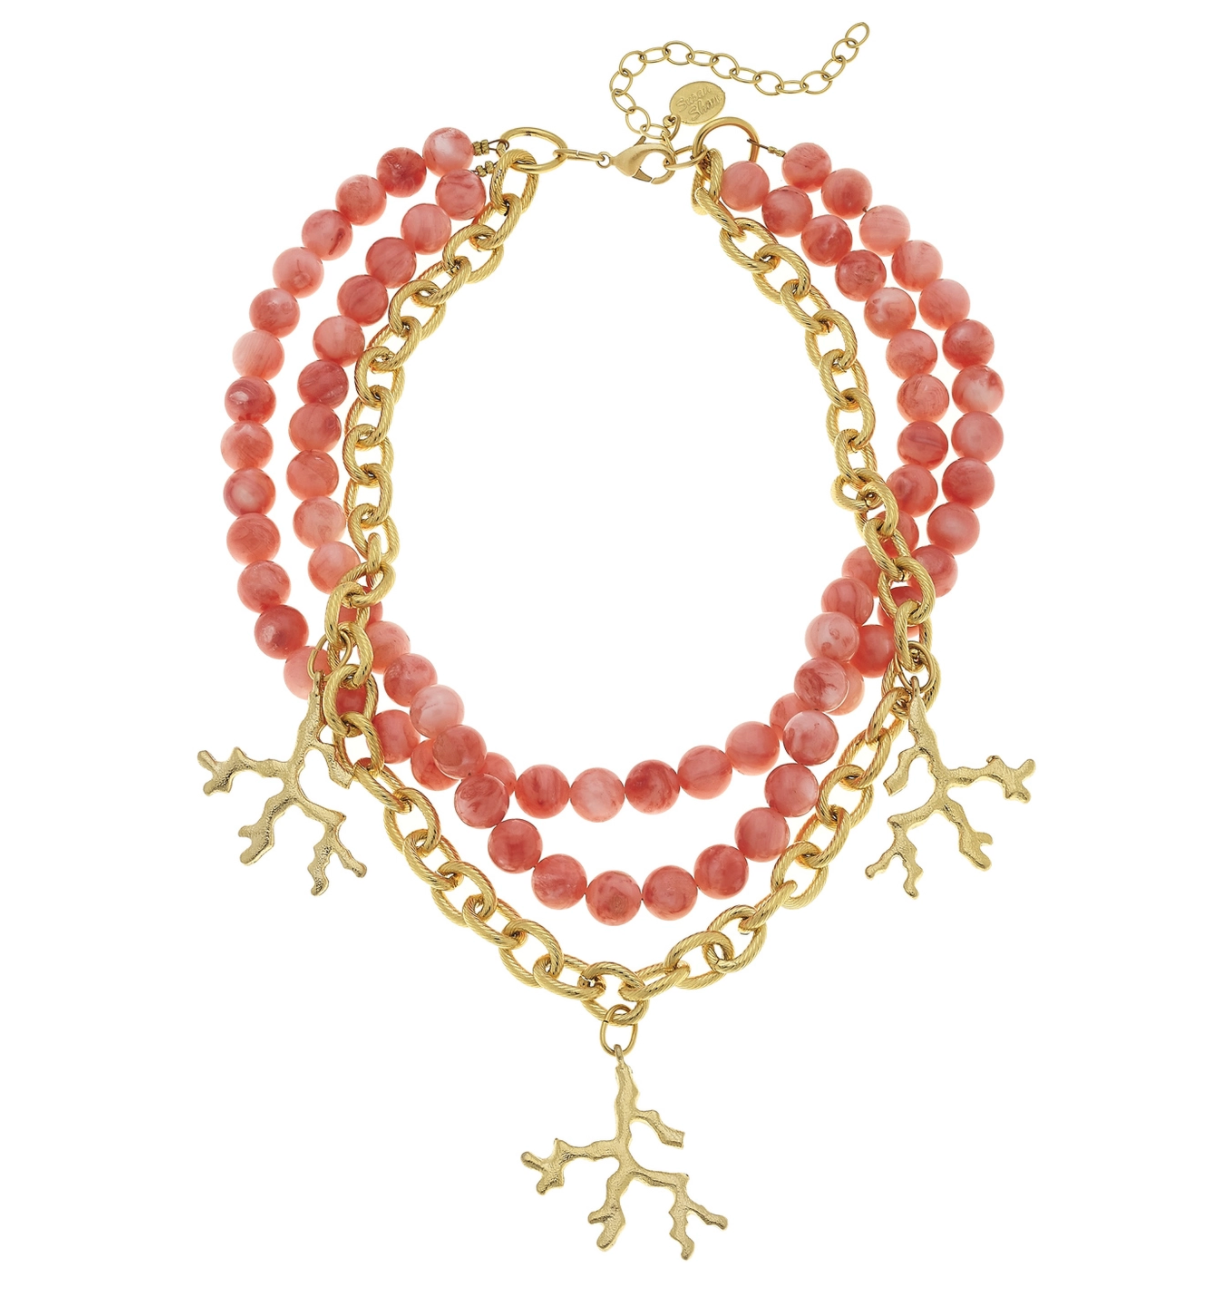 Gold Coral with Pink Coral Necklace